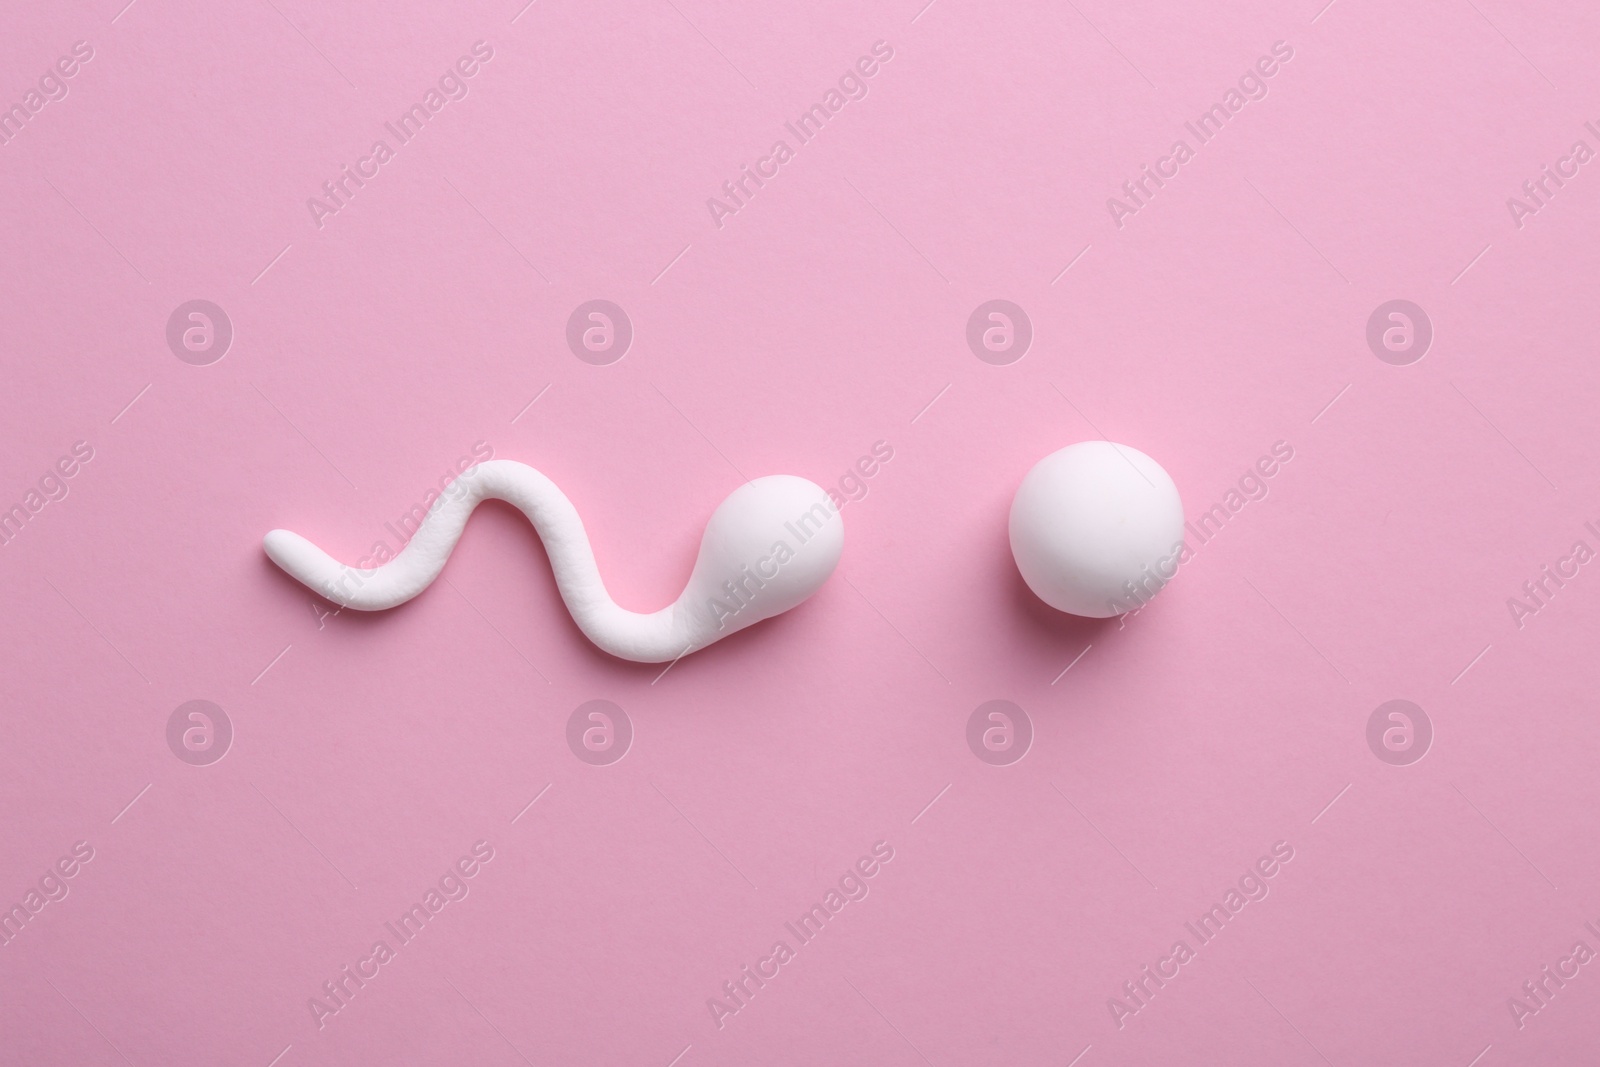 Photo of Fertilization concept. Sperm and egg cells on pink background, top view